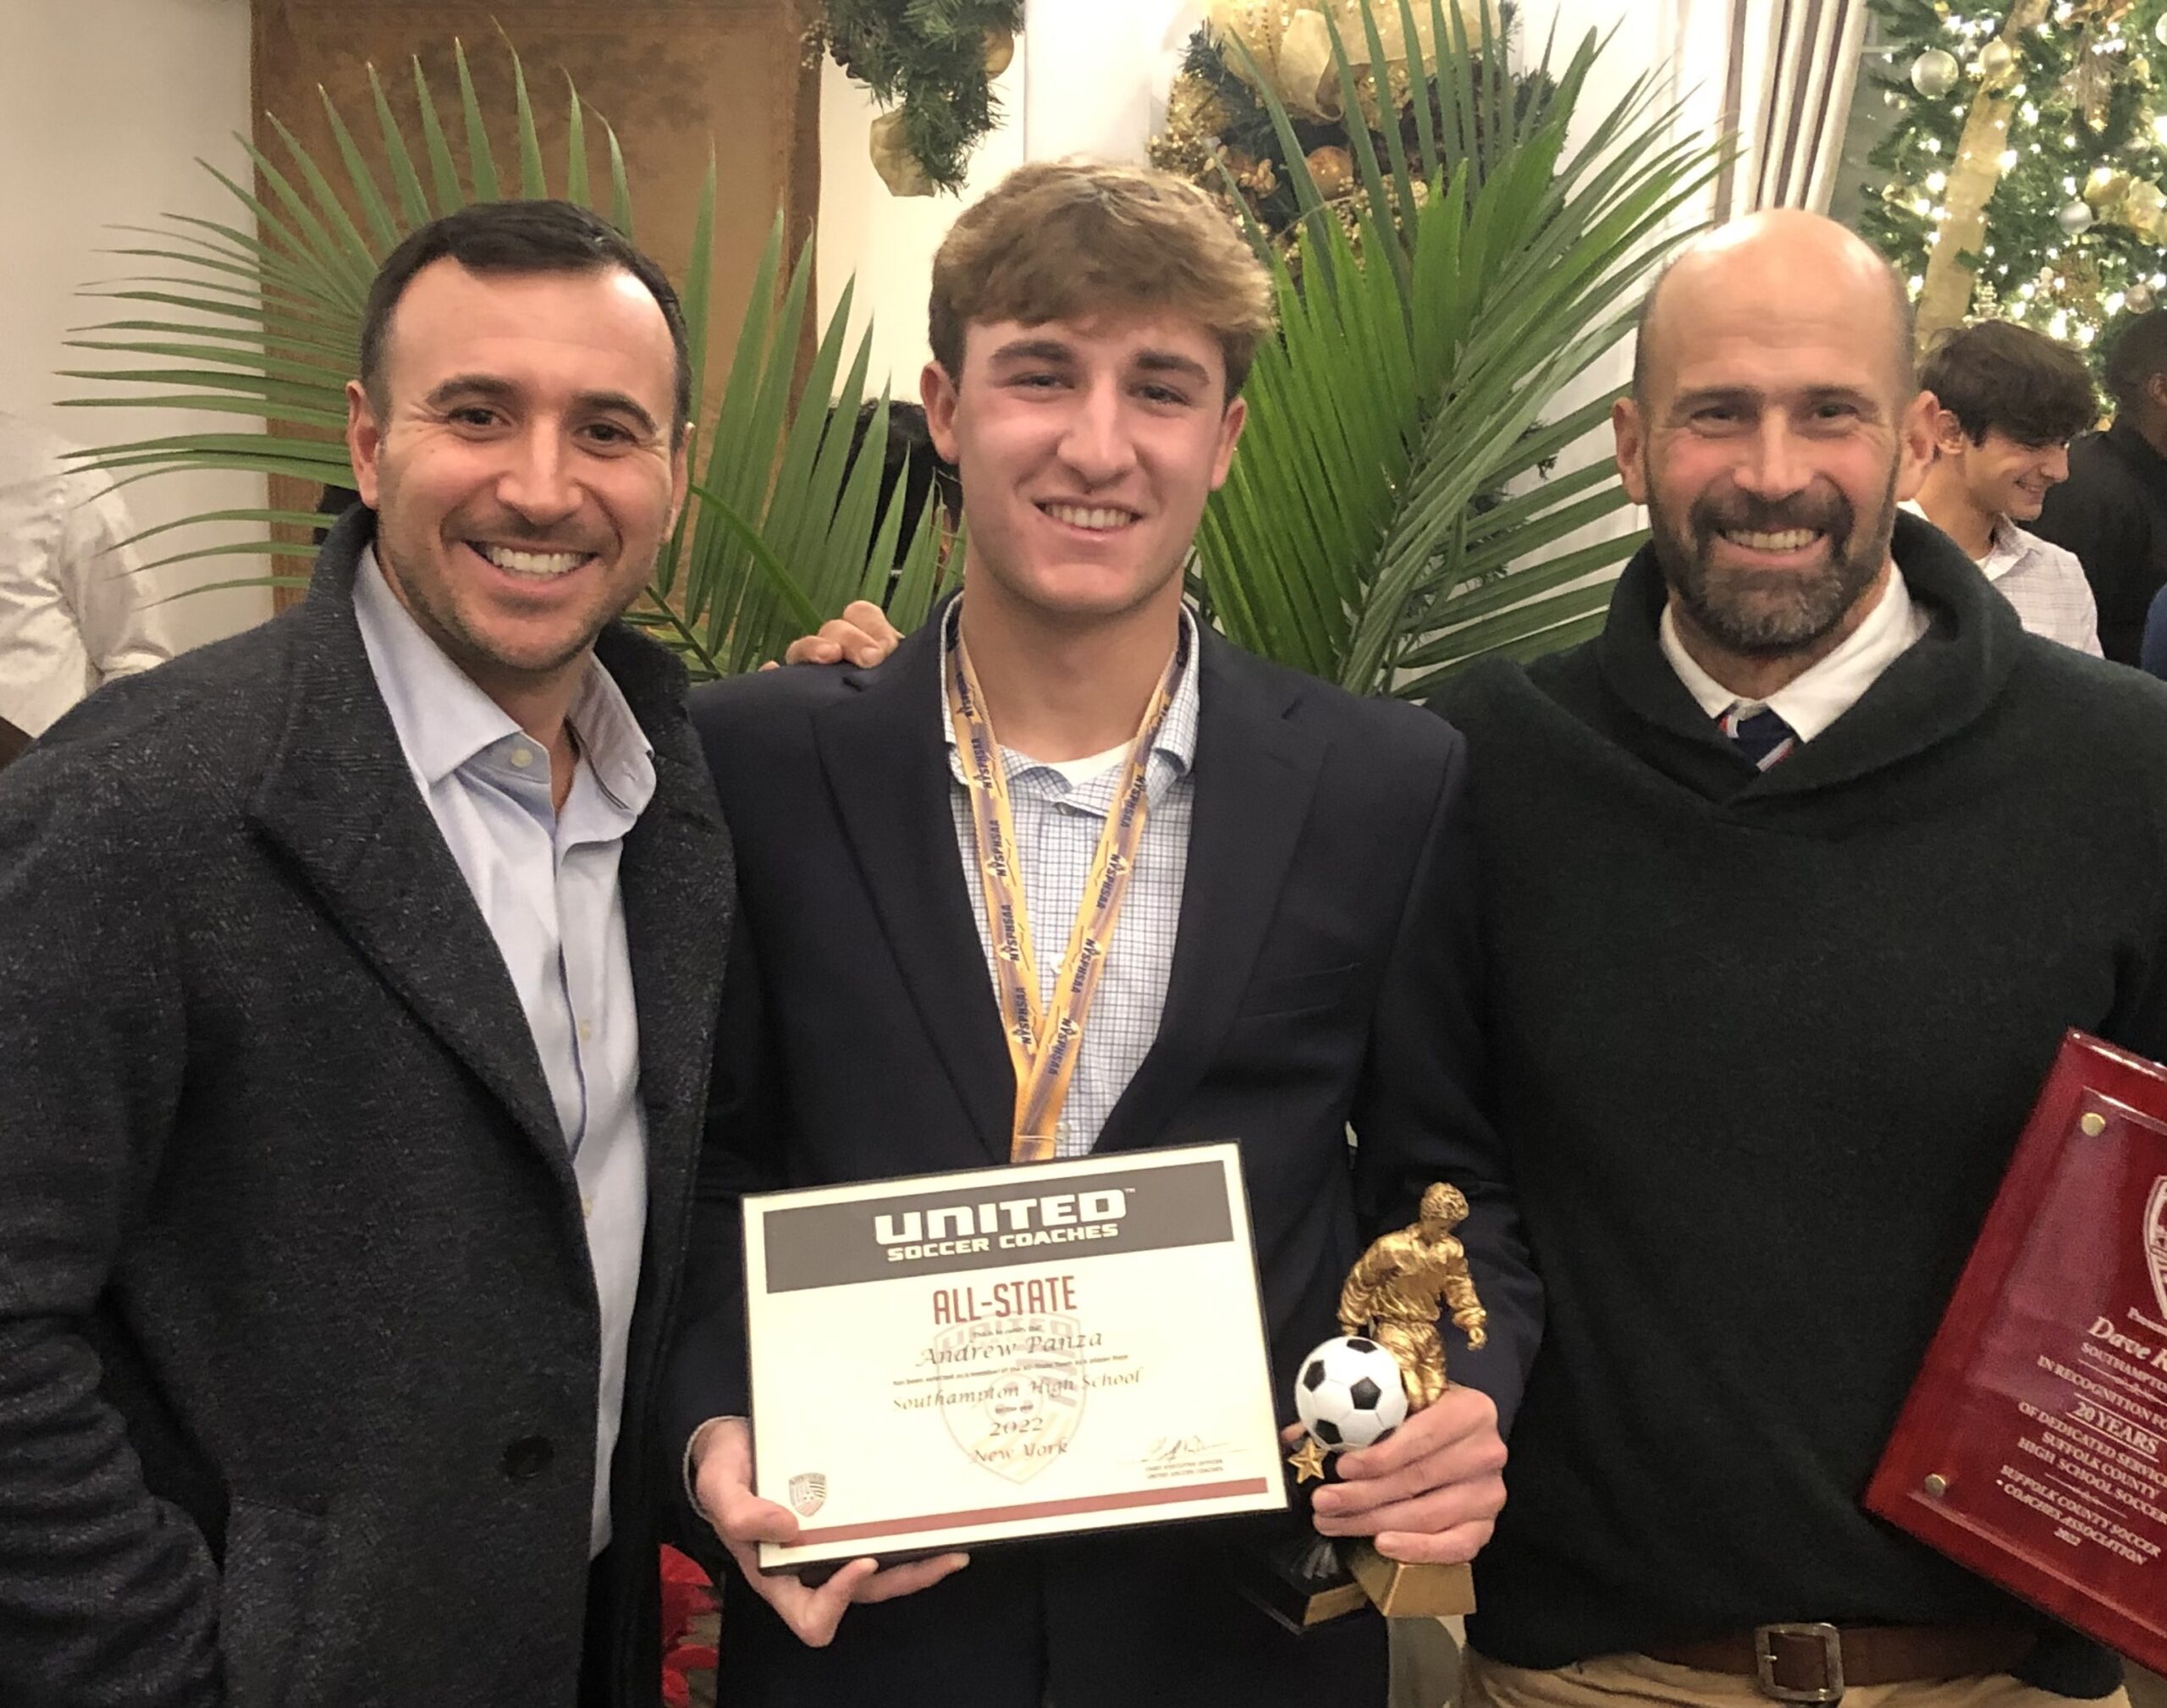 Southampton boys soccer assistant coach Christopher DeRosa, left, with Andy Panza and head coach Dave Riley. Panza was named Fourth Team All-State this past fall.